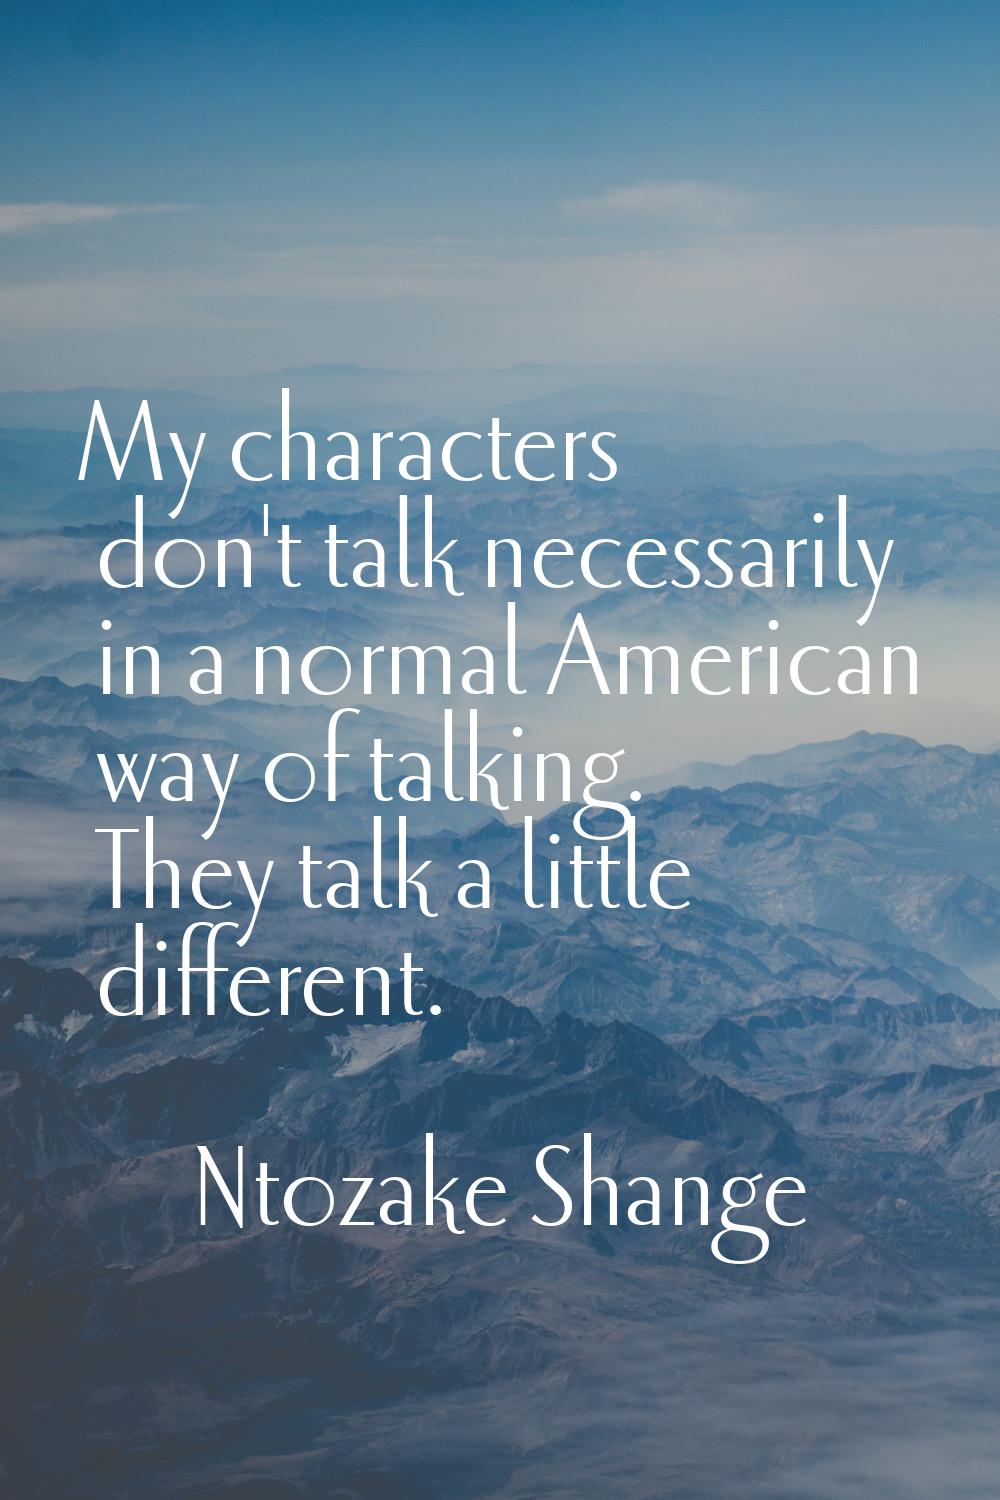 My characters don't talk necessarily in a normal American way of talking. They talk a little differ